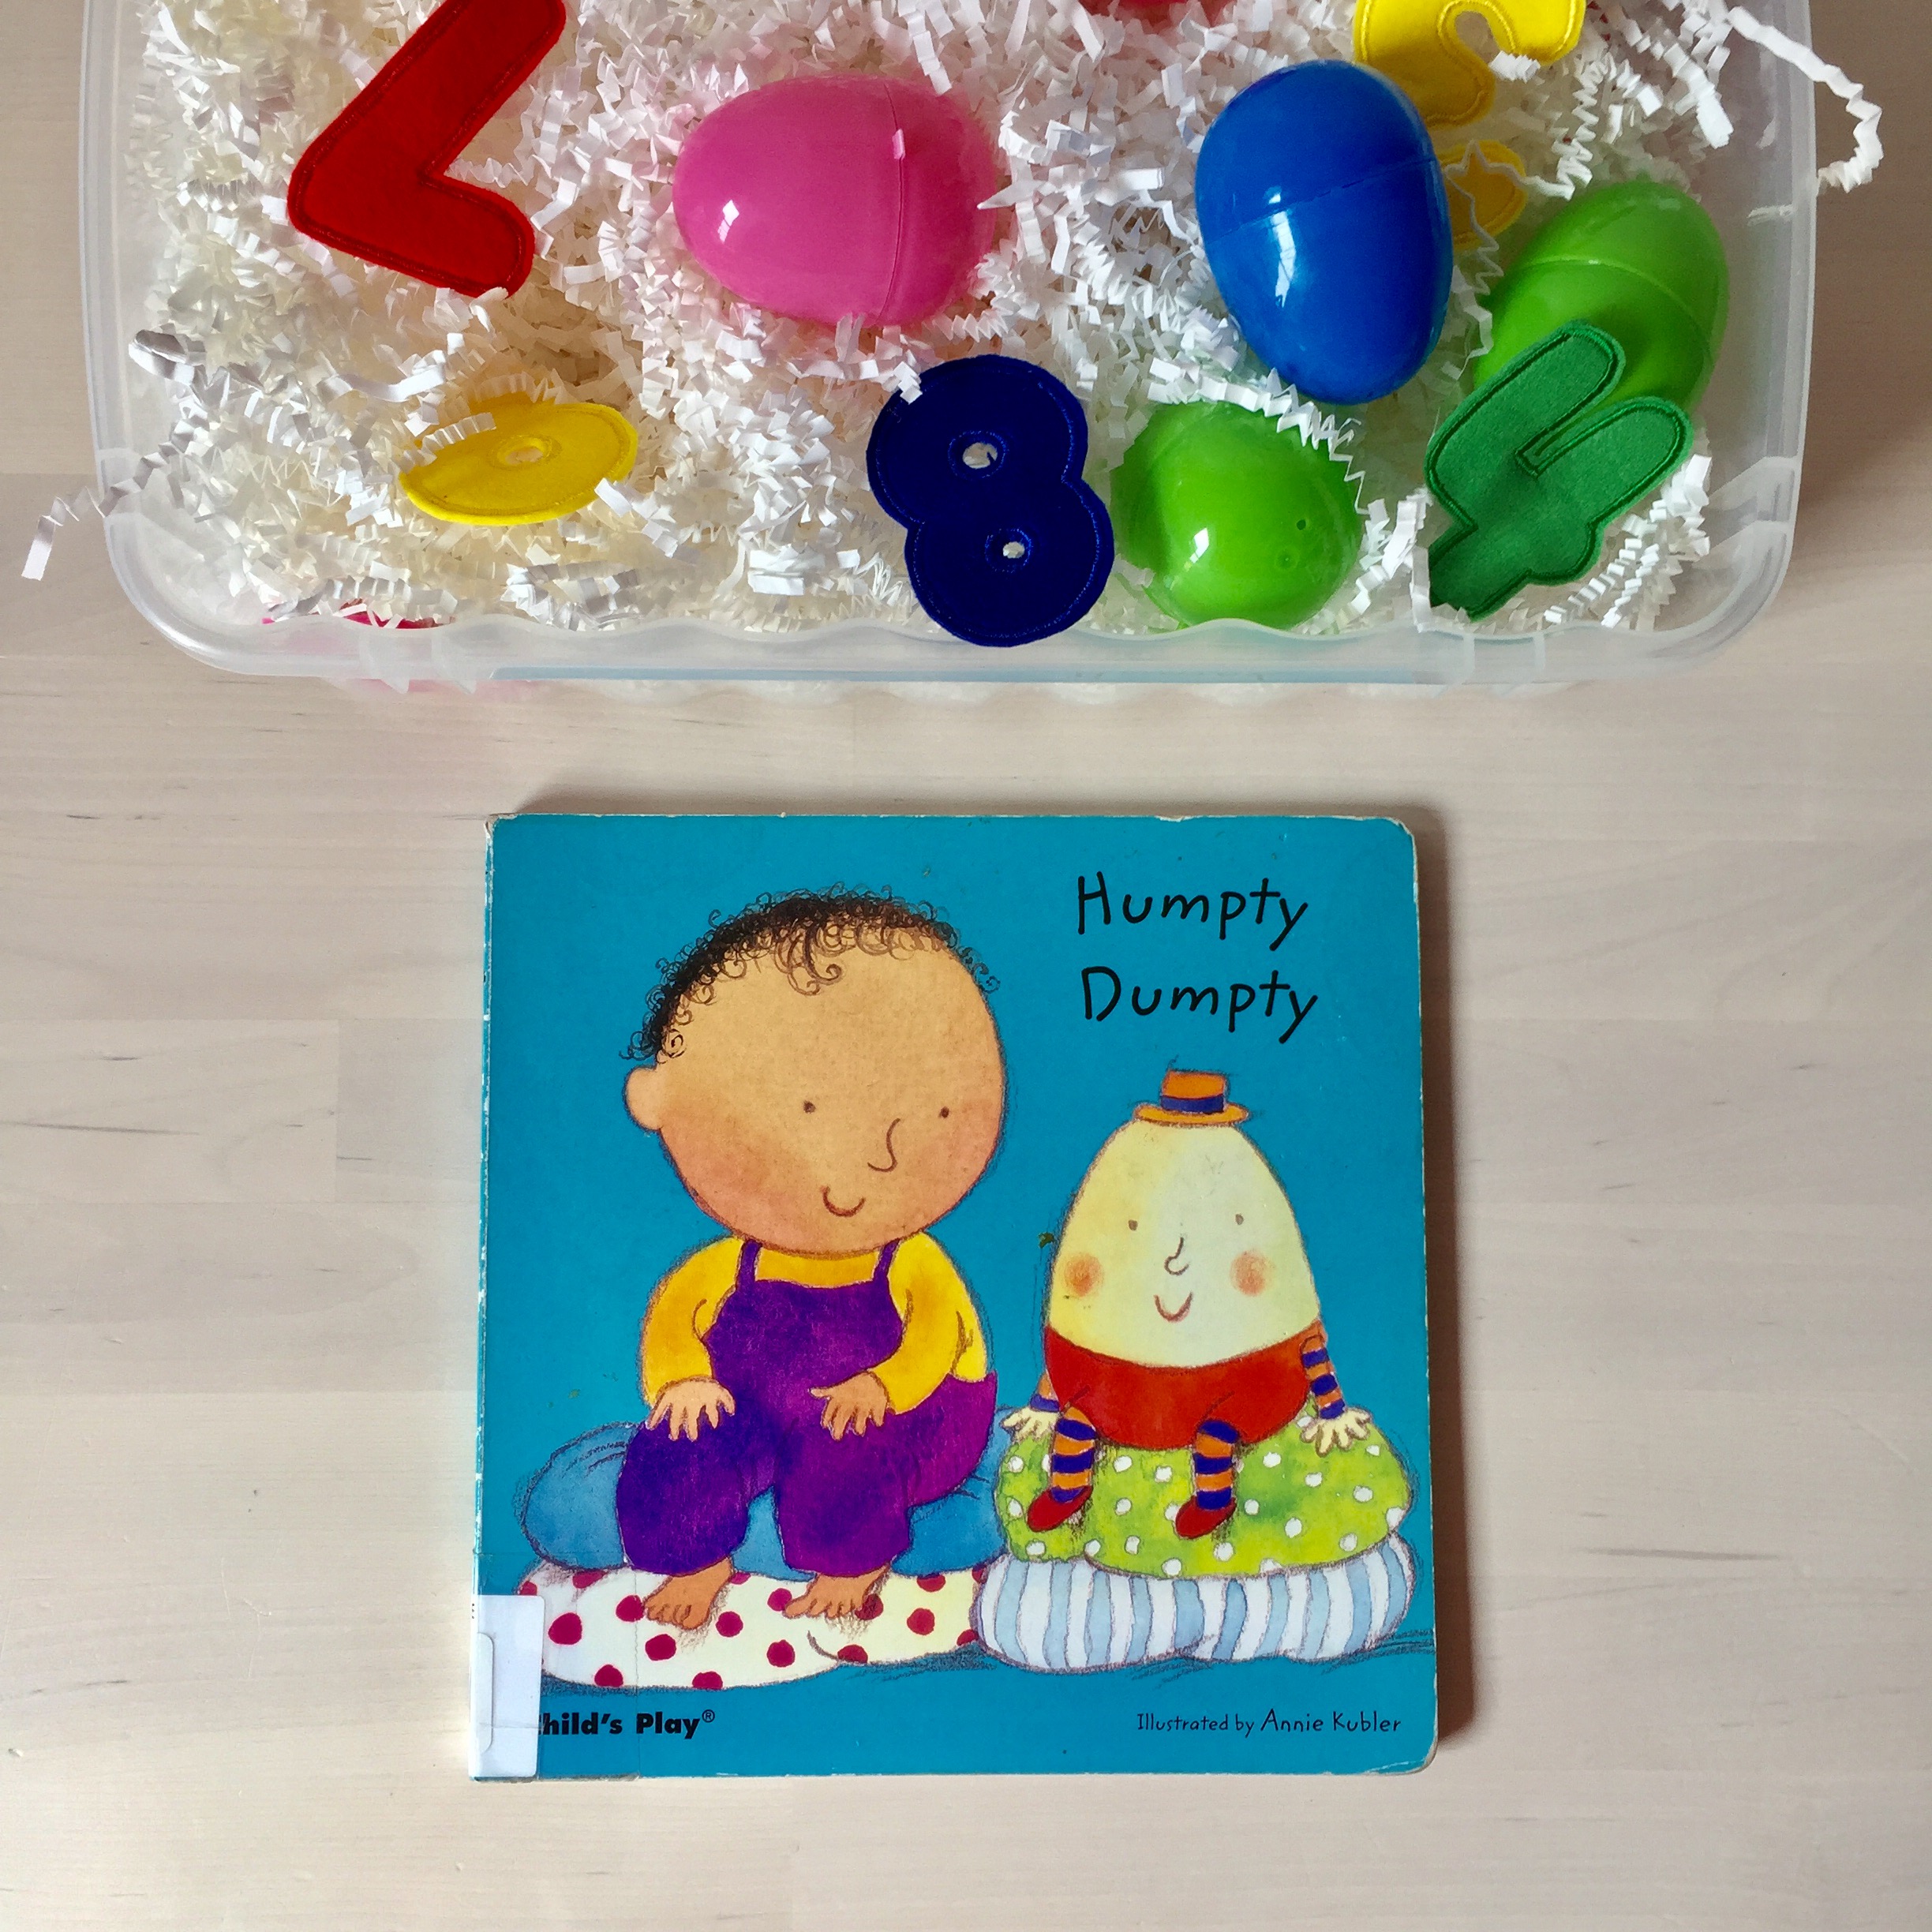 Humpty Dumpty Storytime + Sensory Bin for Babies and Toddlers